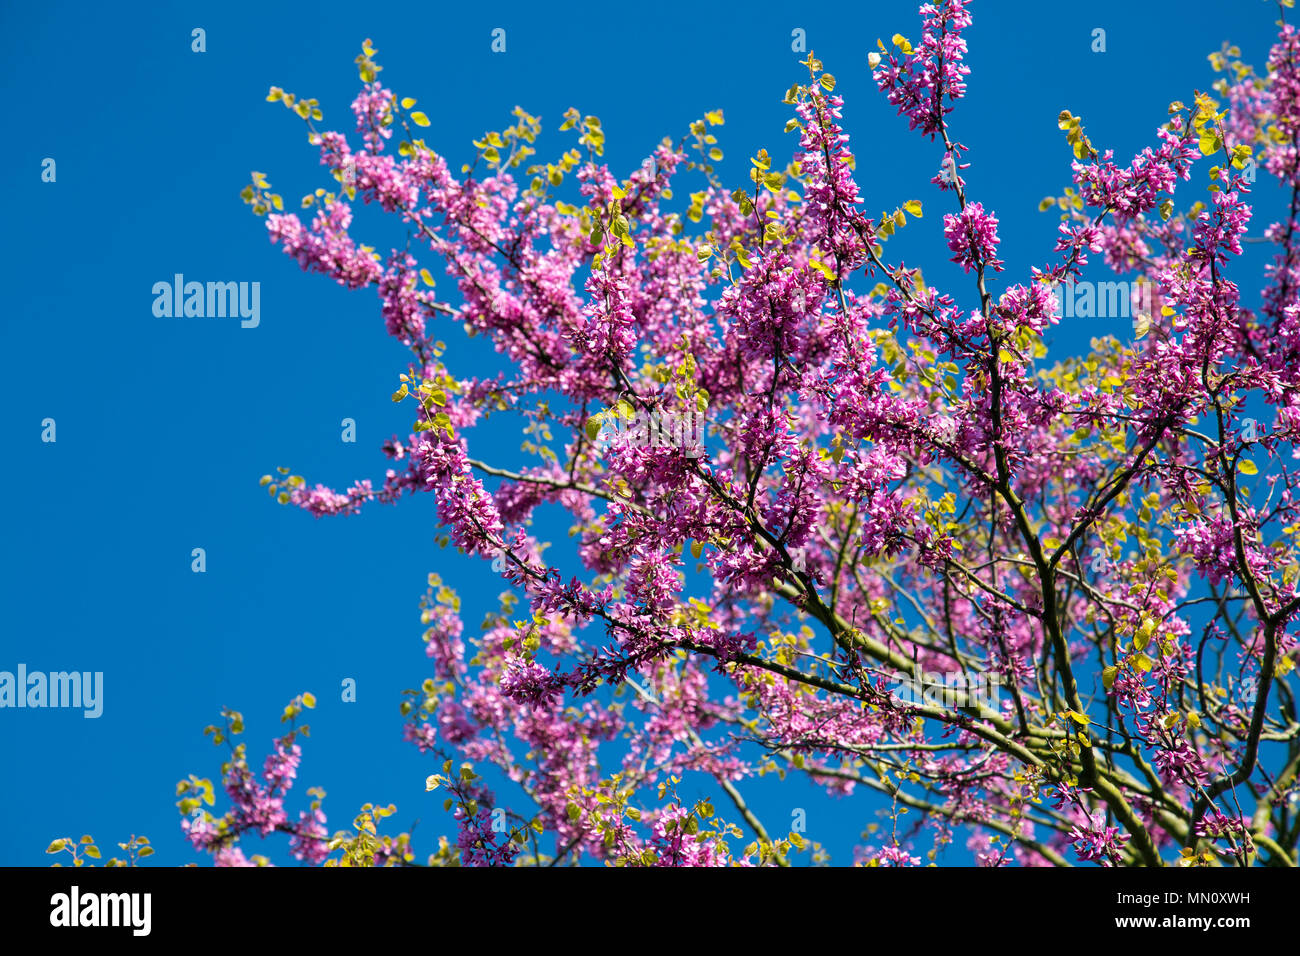 Pink cherry blossom branches against a blue sky in spring, London, UK Stock Photo